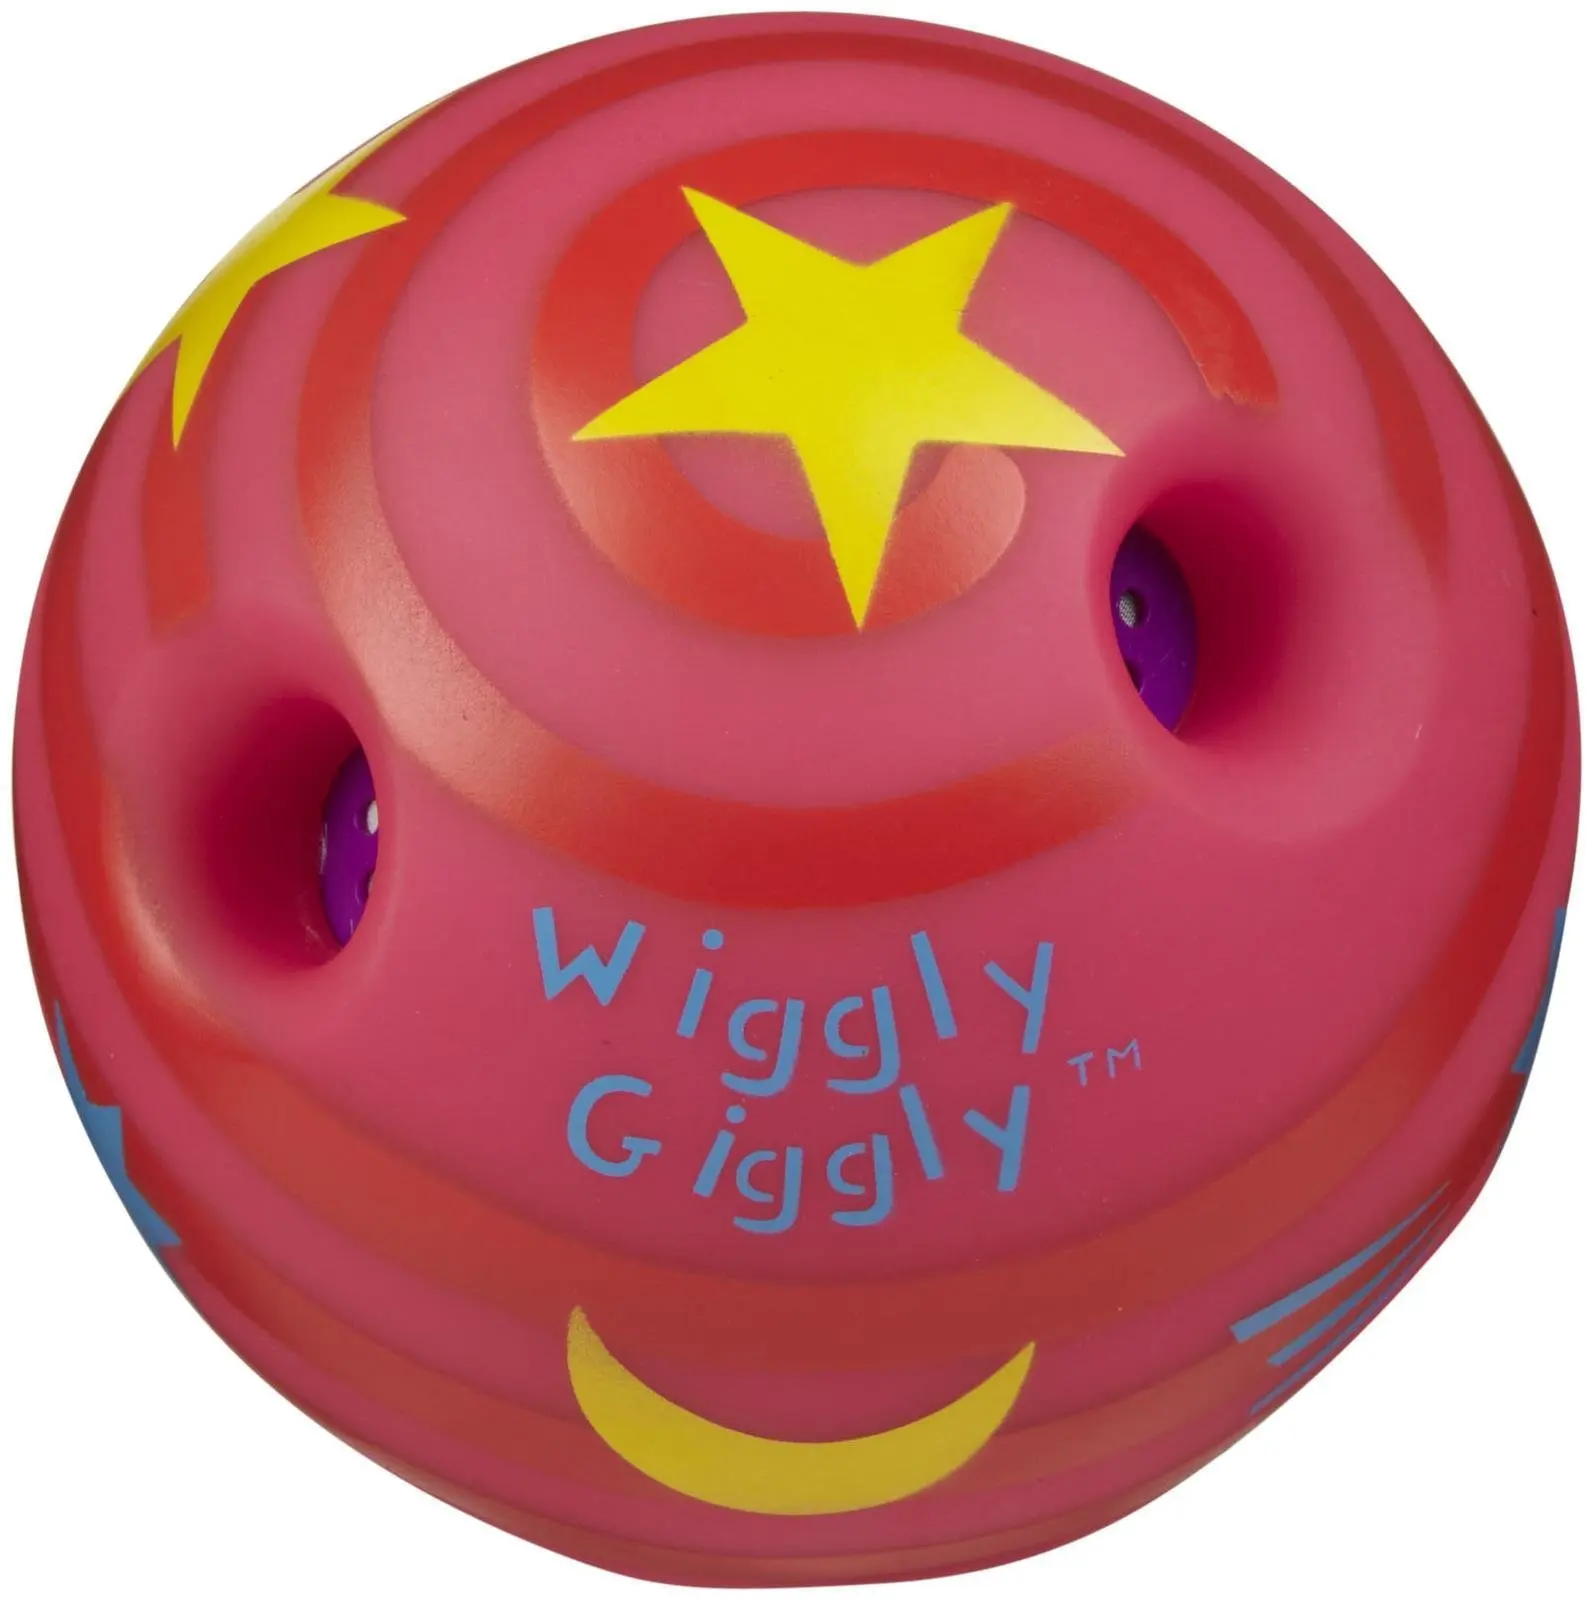 Large Wiggly Giggly Ball by Toysmith (assorted colors, sold individually) .